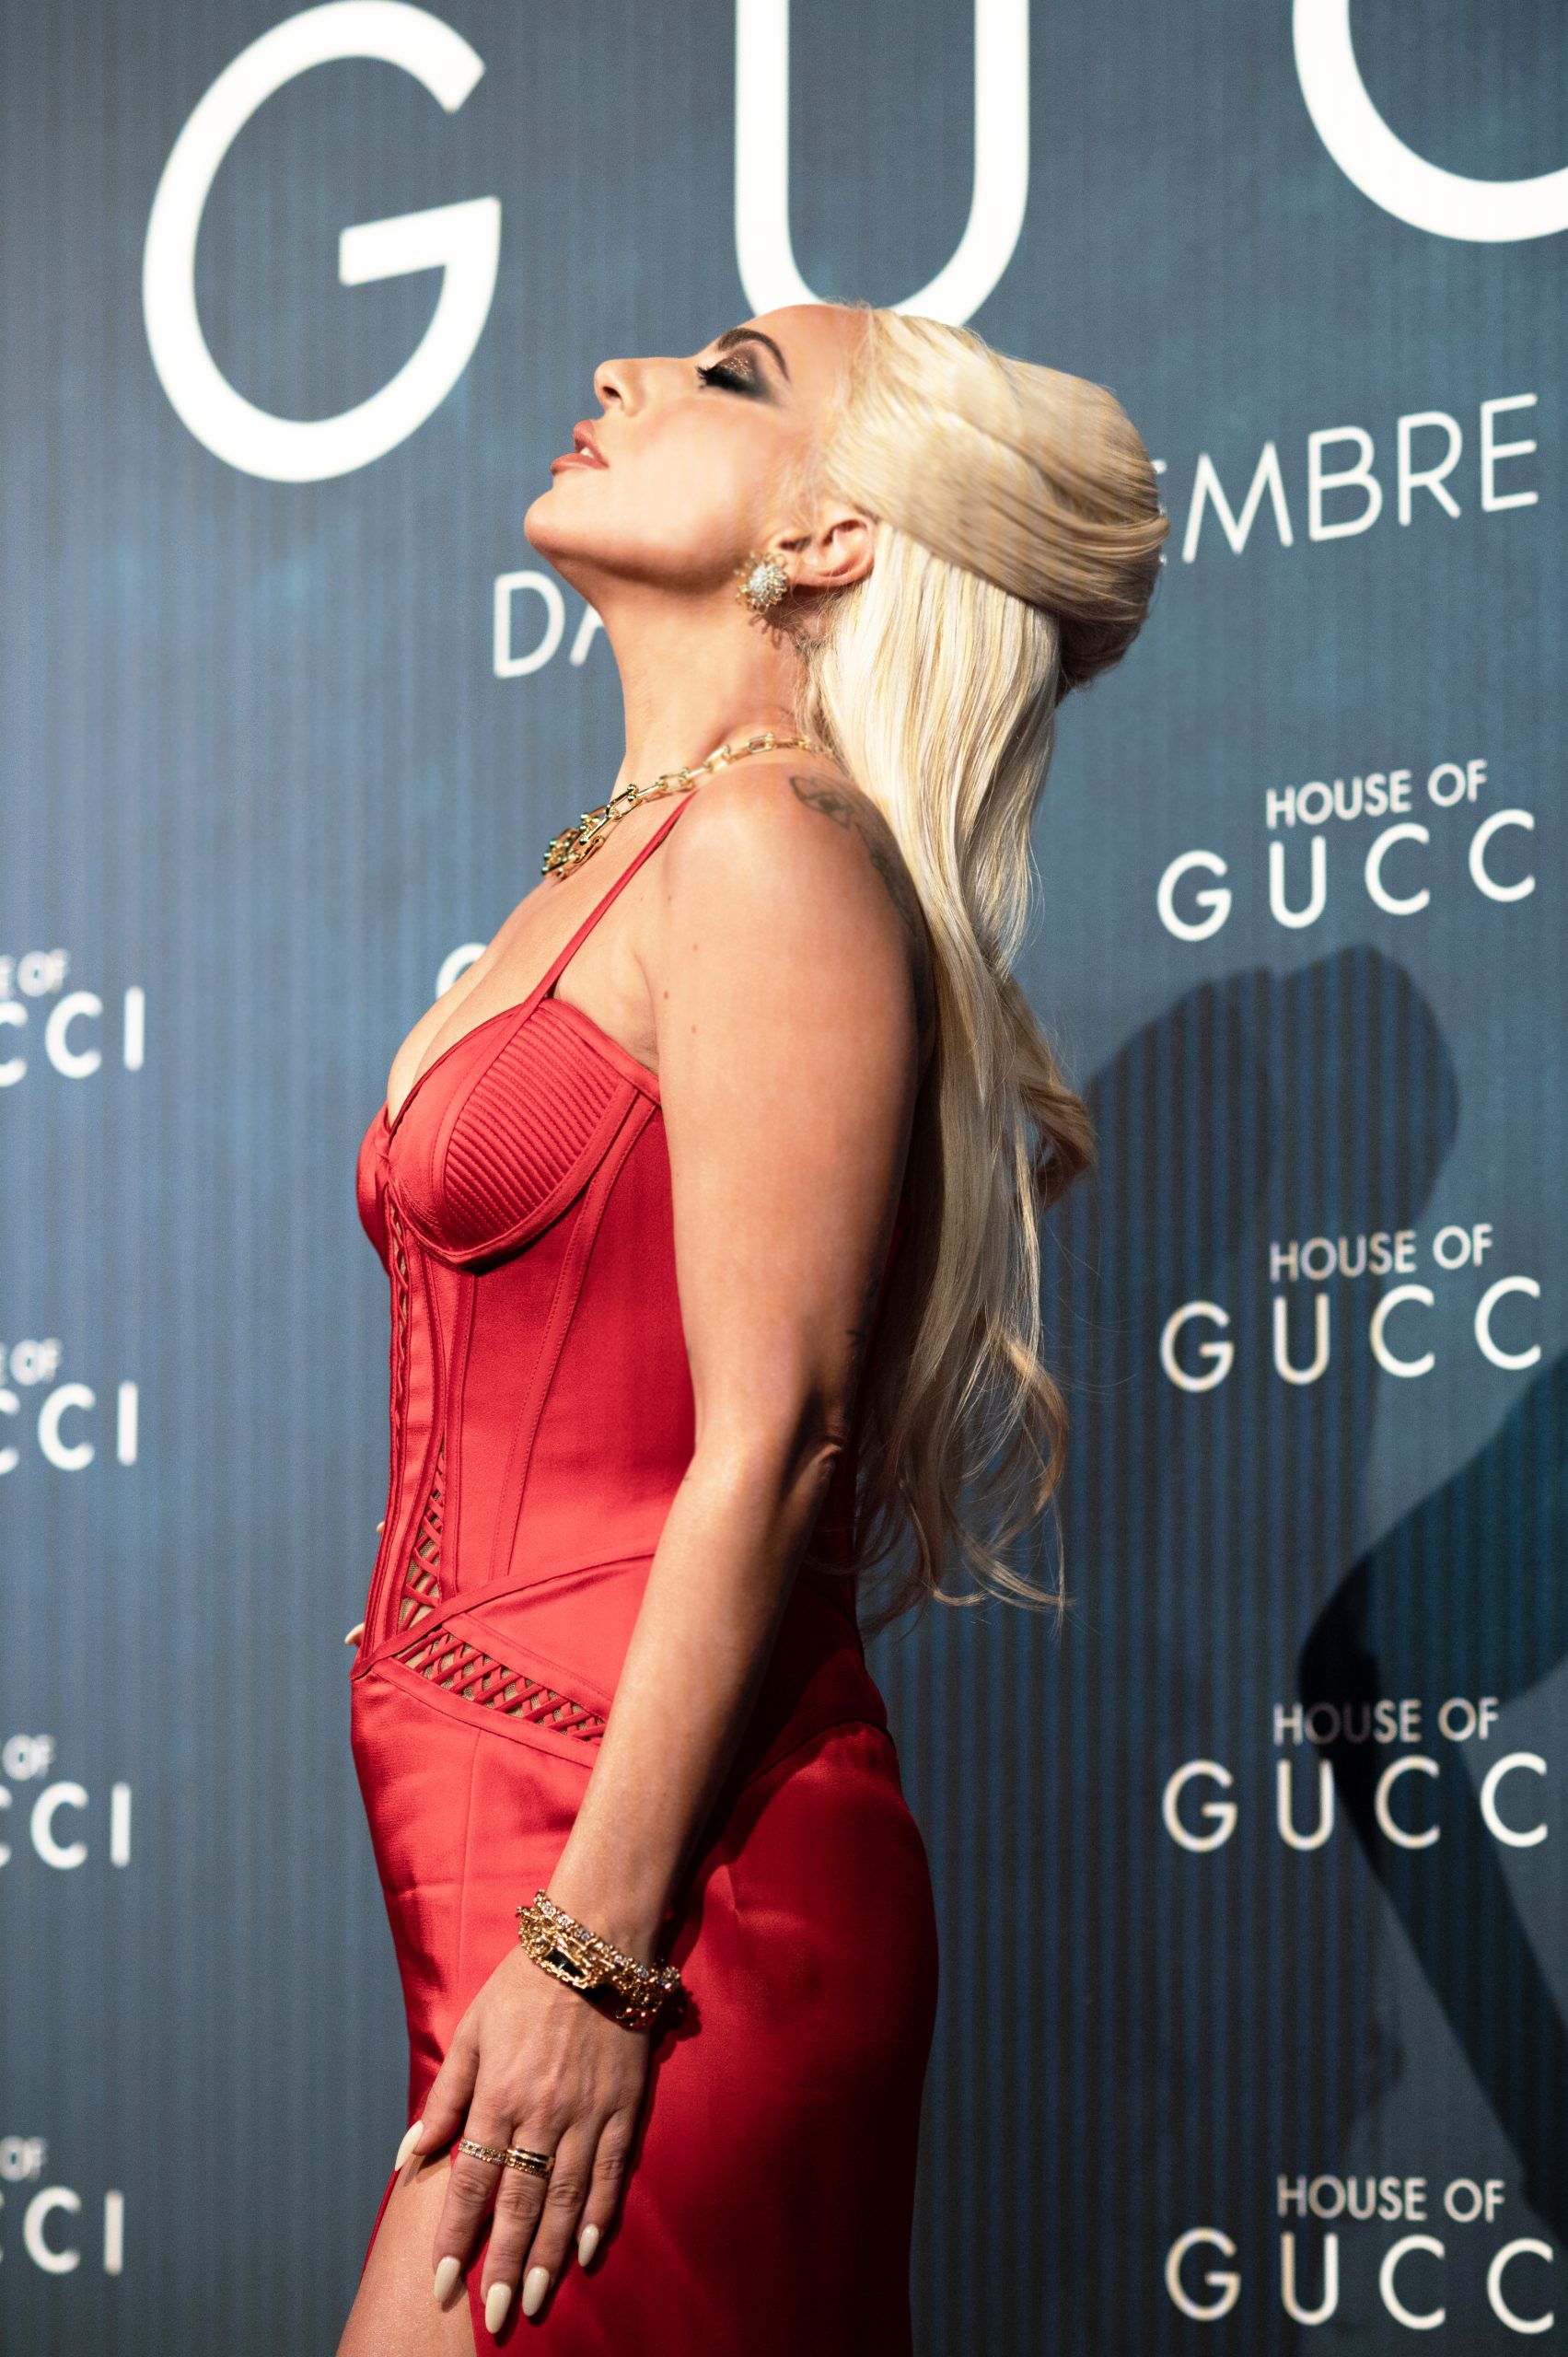 Lady Gaga 'House of Gucci' Press Tour Looks: Gucci, Versace